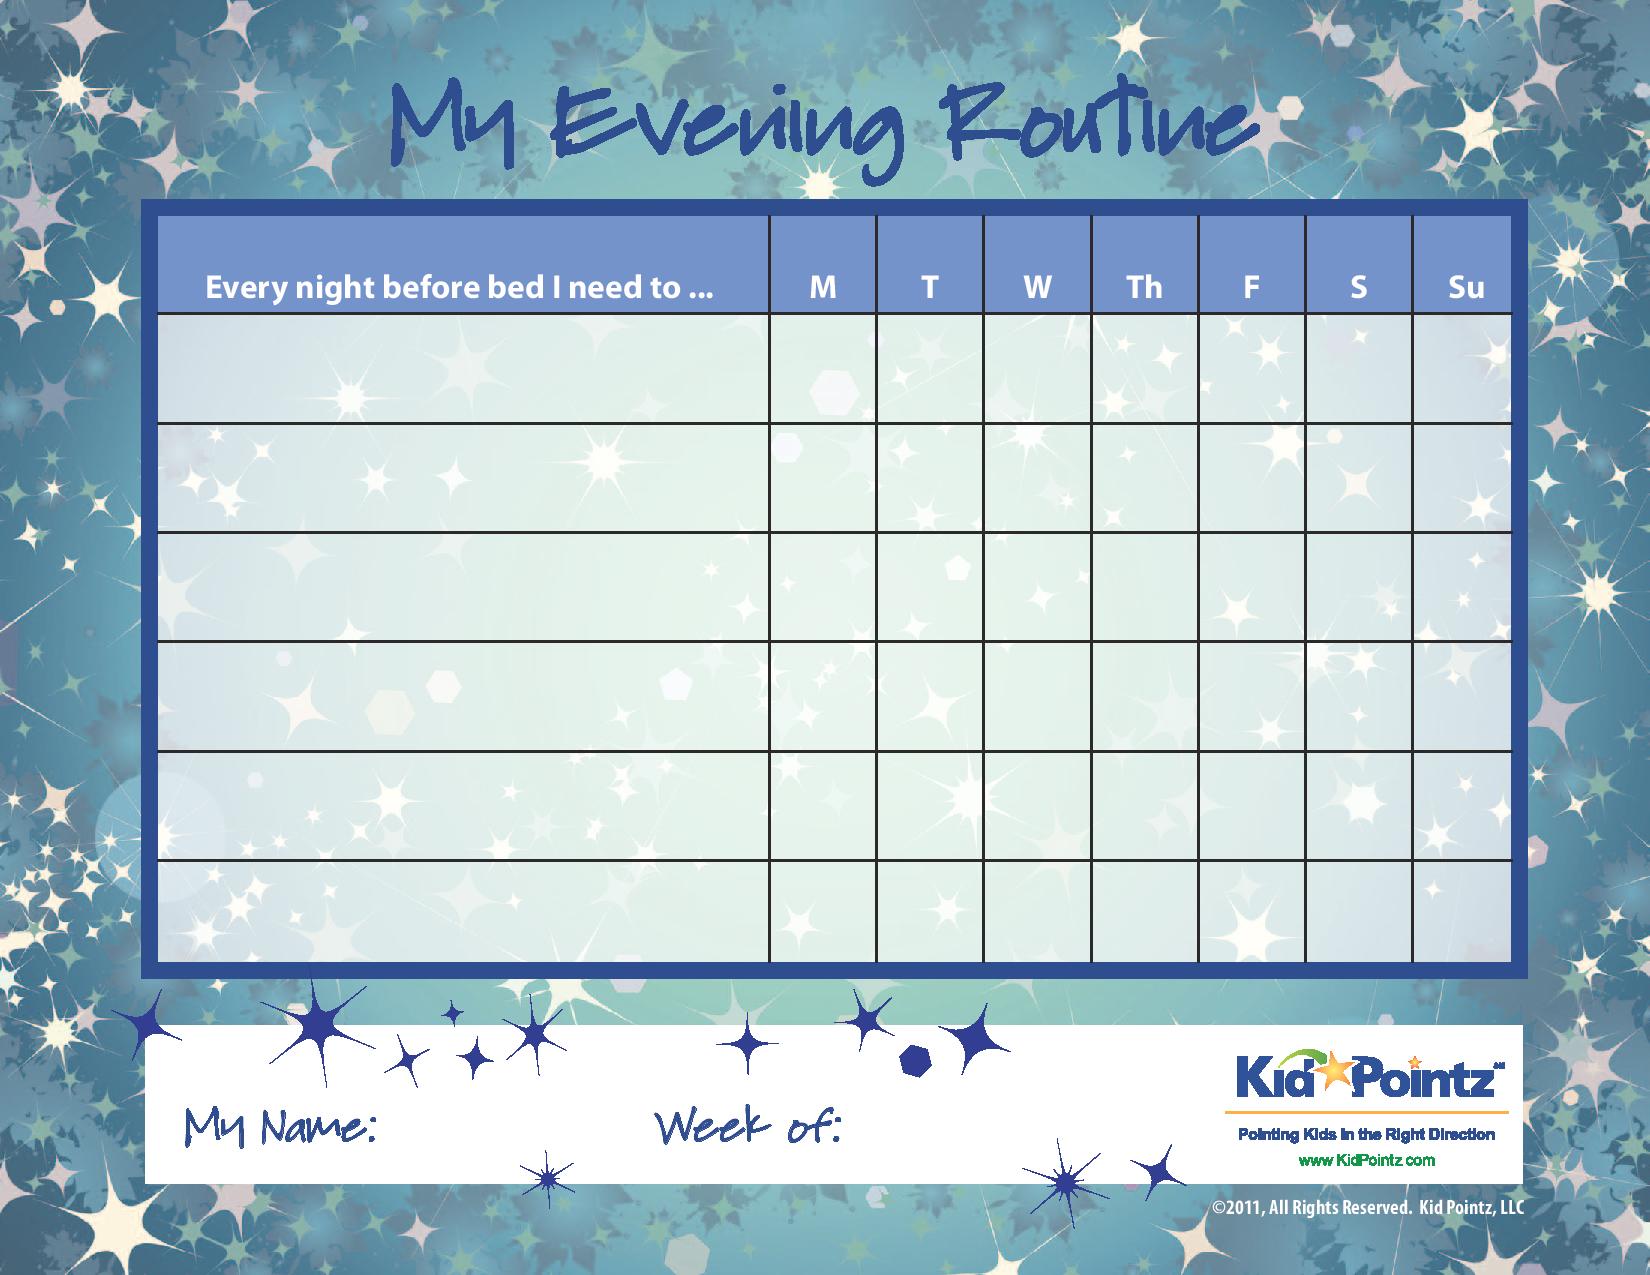 3-best-images-of-free-printable-daily-routine-chart-printable-morning-routine-chart-kids